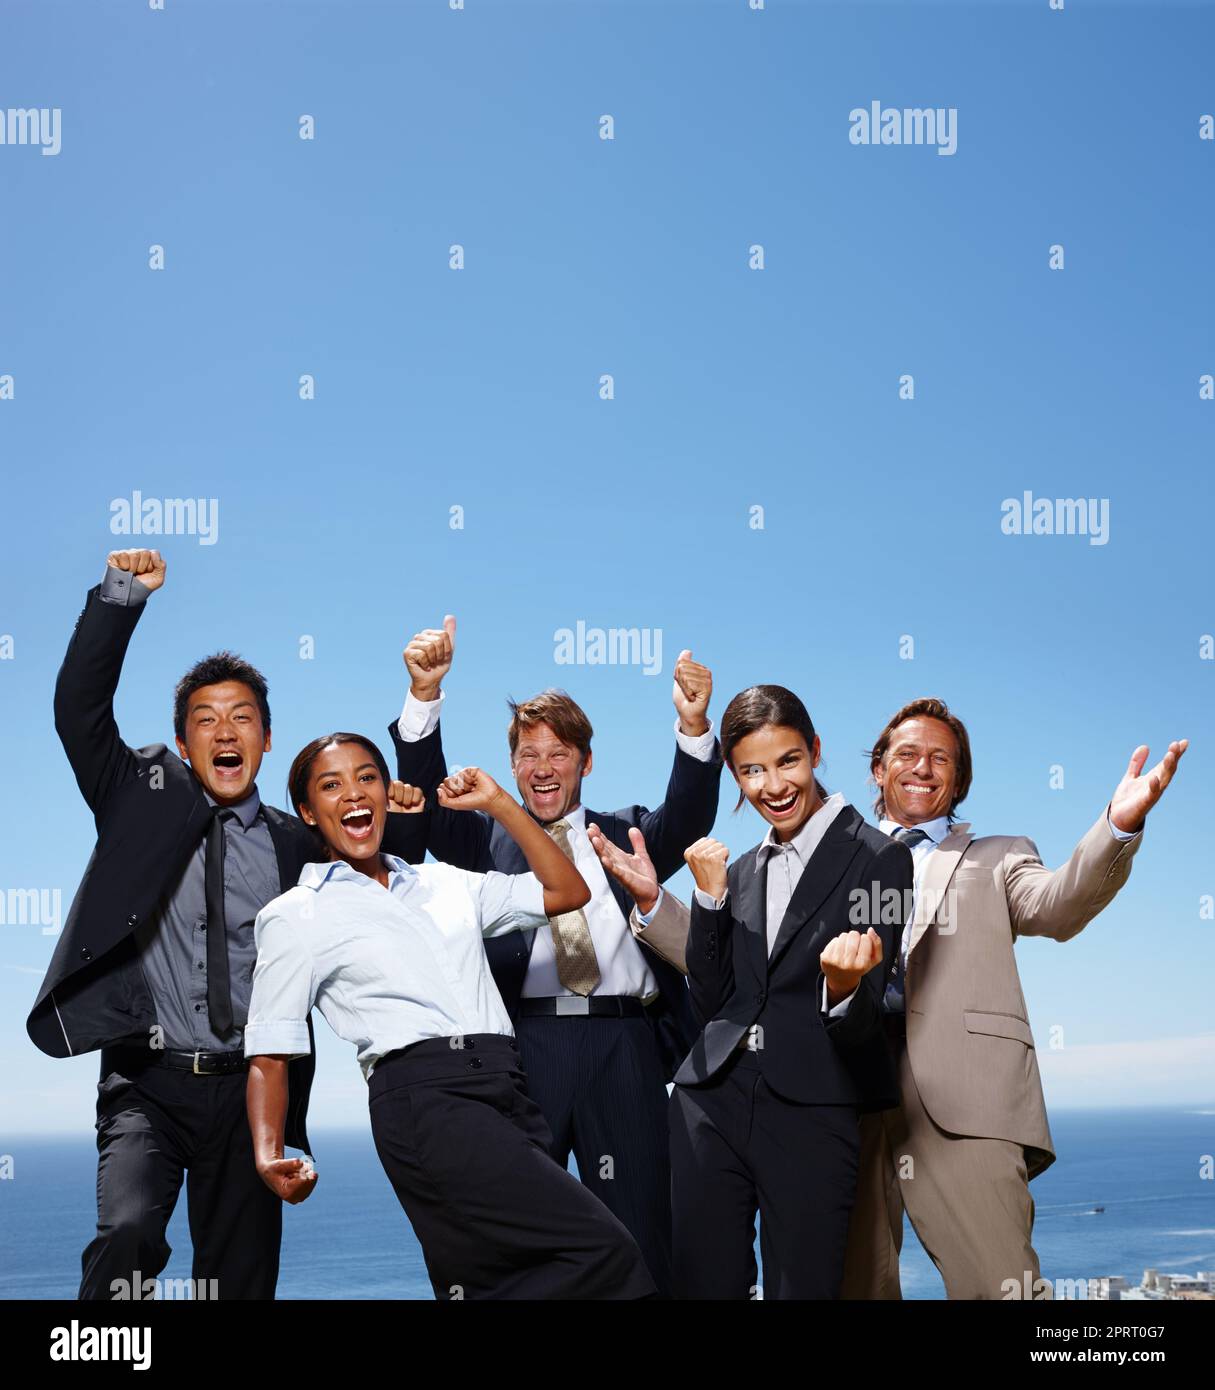 The skys the limit. a group of business people acting excited with their hands in the air. Stock Photo